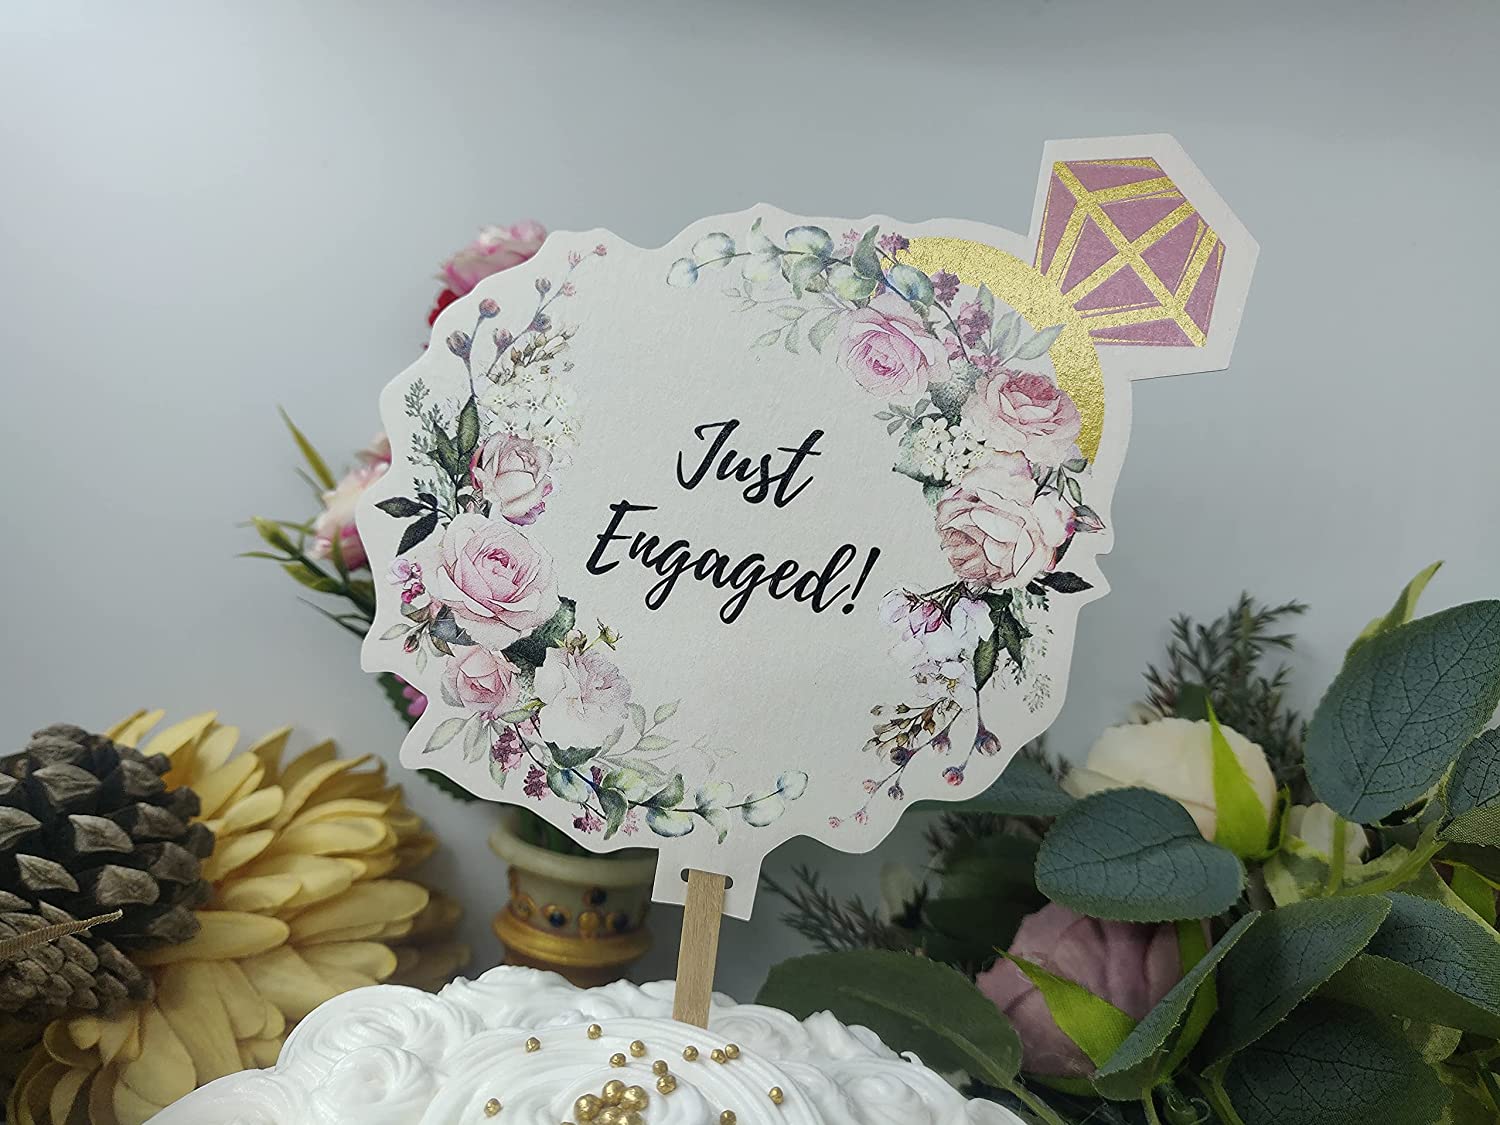 Just Engaged Cake Topper Engagement Cake Topper - Etsy | Just engaged,  Engagement cakes, Engagement cake toppers